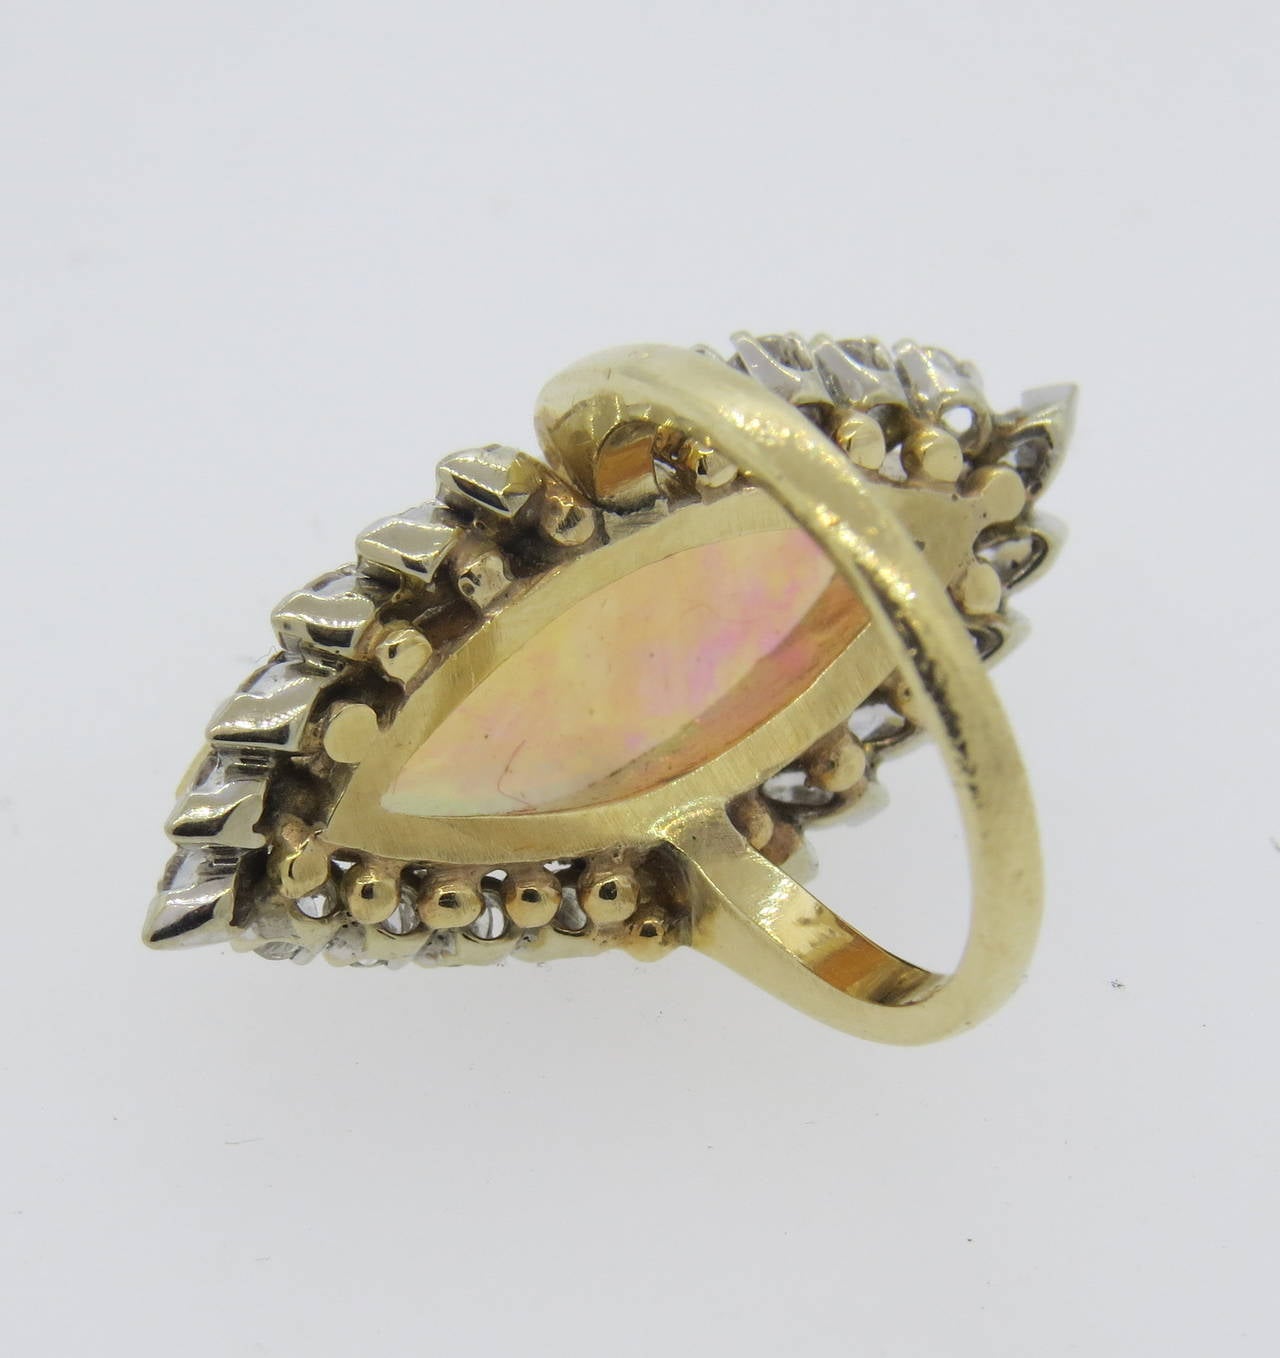 A 14k yellow gold cocktail ring set with an opal measuring 22mm x 9.5mm surrounded by approximately 1 carat of H/ VS-SI1 diamonds.  The size of the ring is 5.5 and the top of the ring measures 31mm x 15mm.  The weight of the ring is 9.6 grams. 